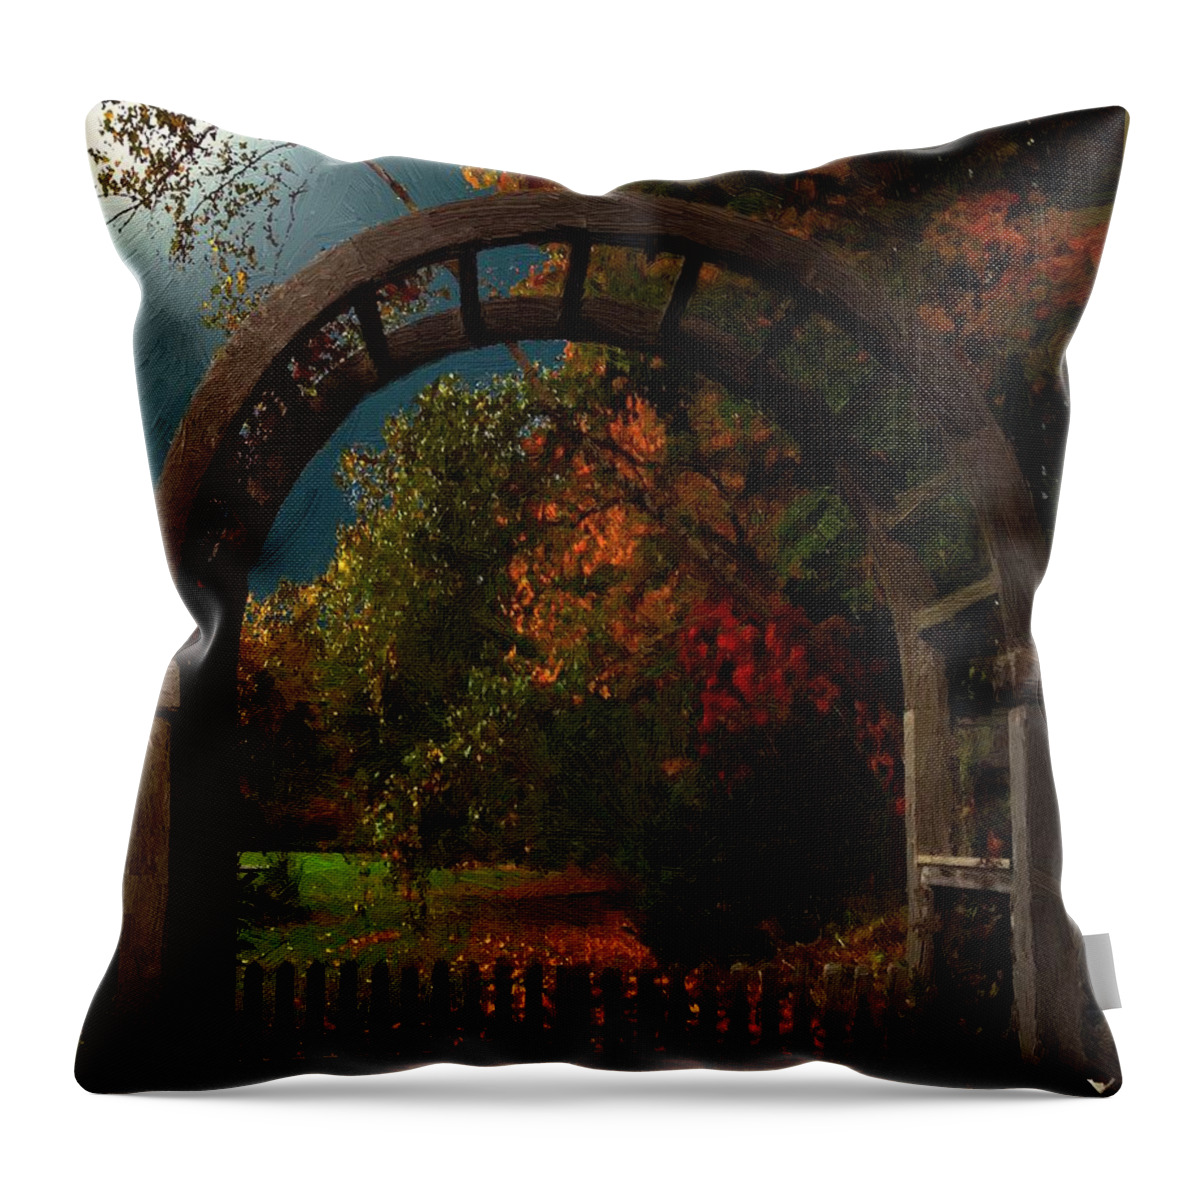 Moonlight Throw Pillow featuring the painting Autumn Archway by RC DeWinter